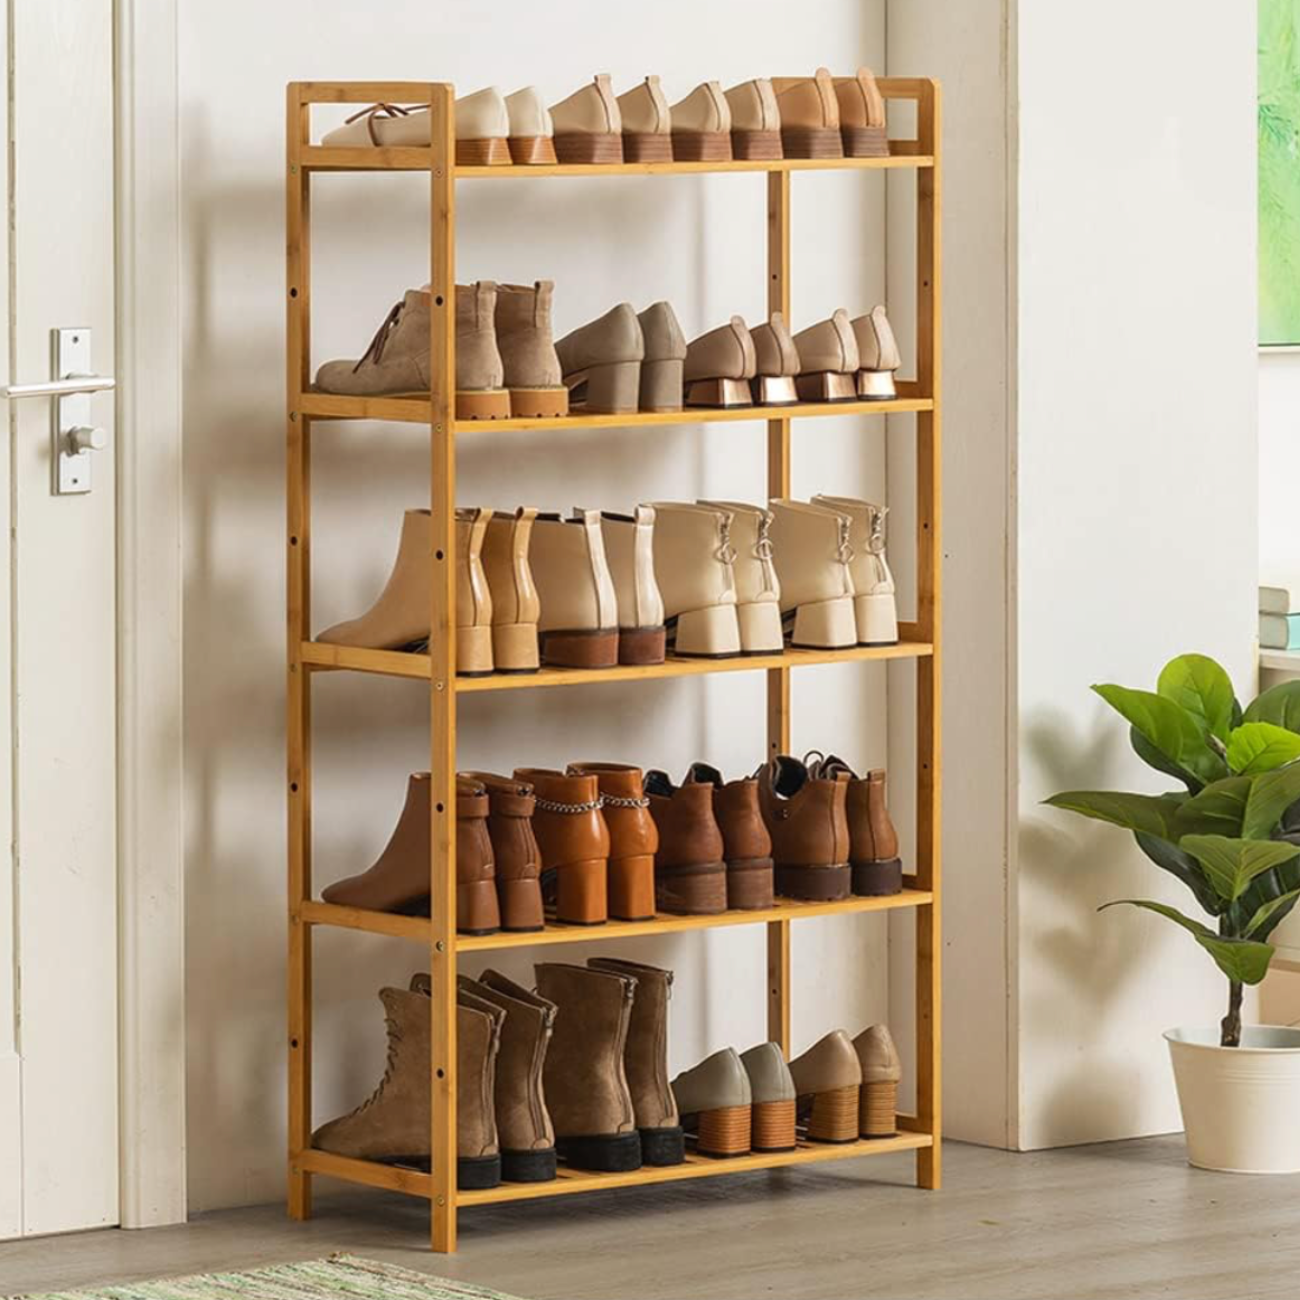 3 Clever Boot Organizers